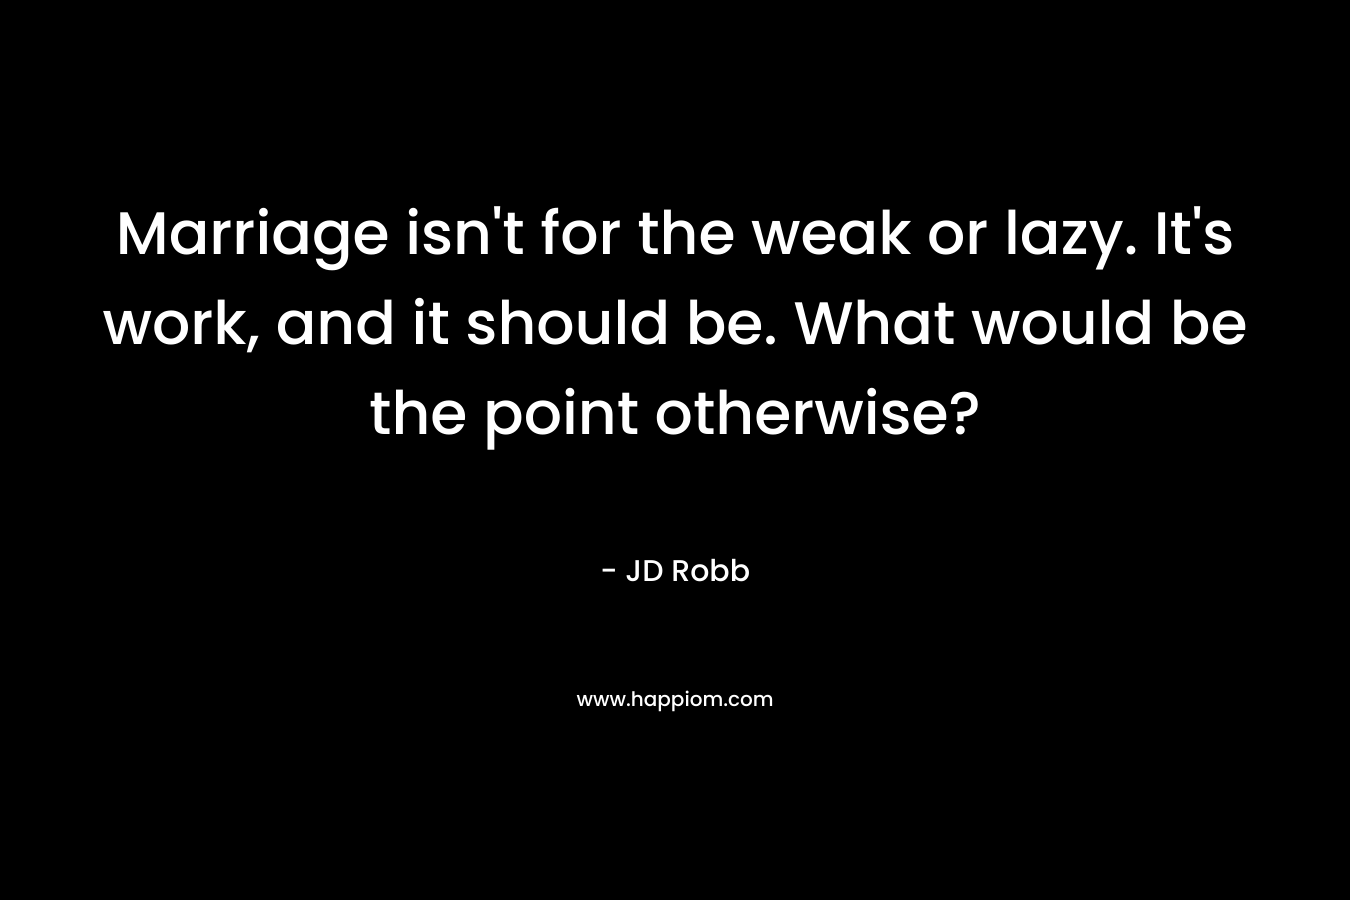 Marriage isn’t for the weak or lazy. It’s work, and it should be. What would be the point otherwise? – JD Robb